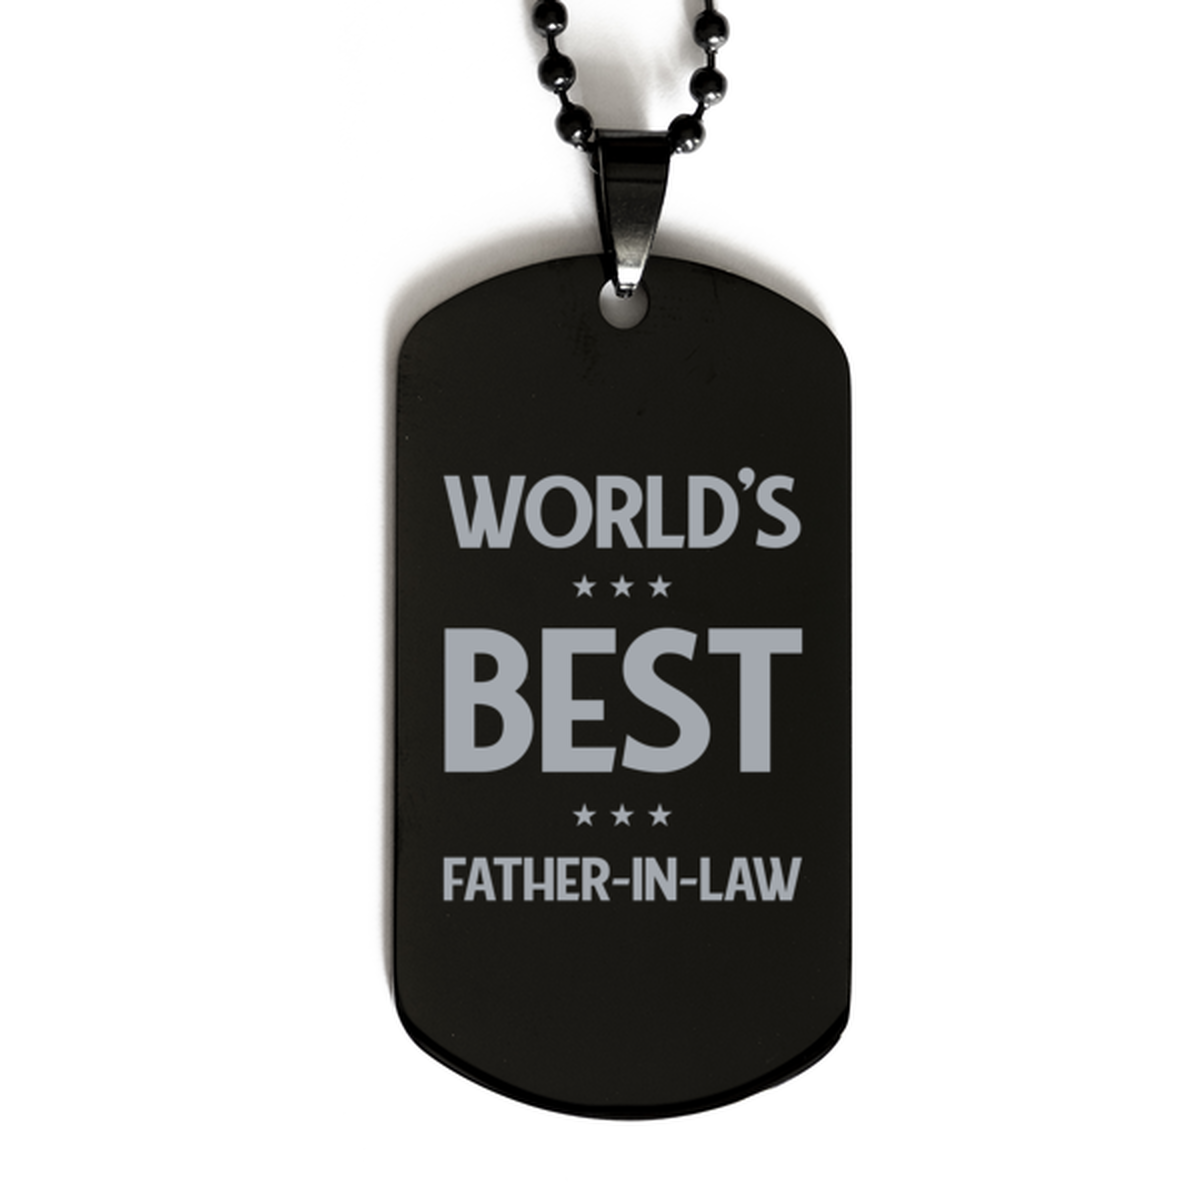 Worlds Best Father-in-law Gifts, Funny Black Engraved Dog Tag For Father-in-law, Birthday Presents For Men